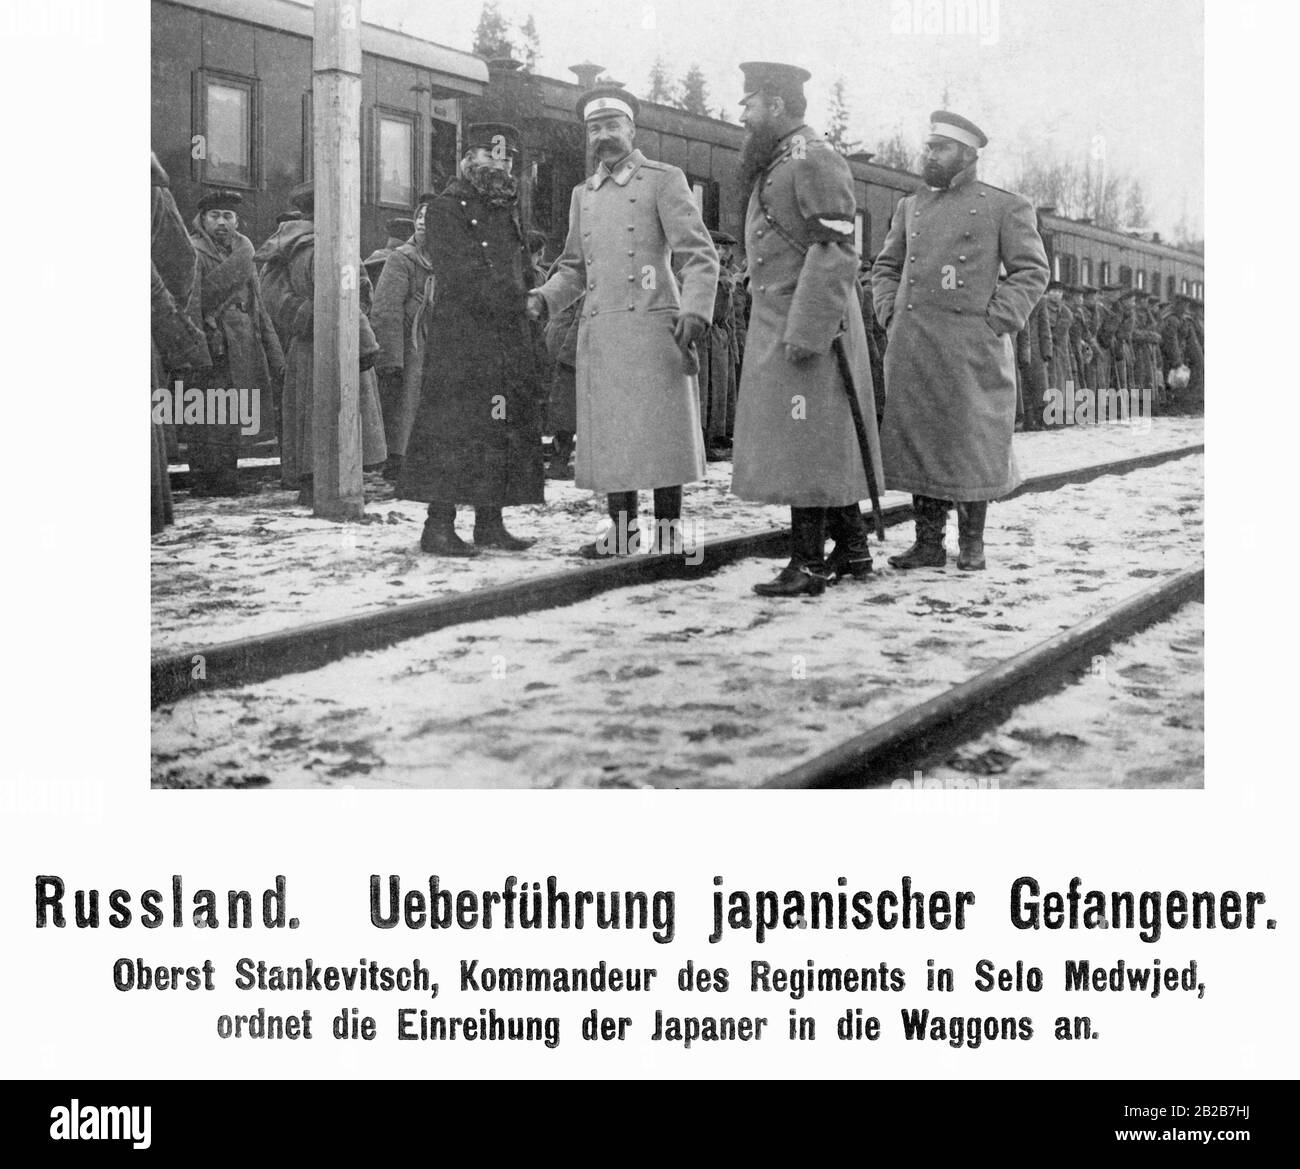 The commander of the troops in Selo Medwjed, Colonel Stankevitch, in front of a train with japanese captives. Stock Photo